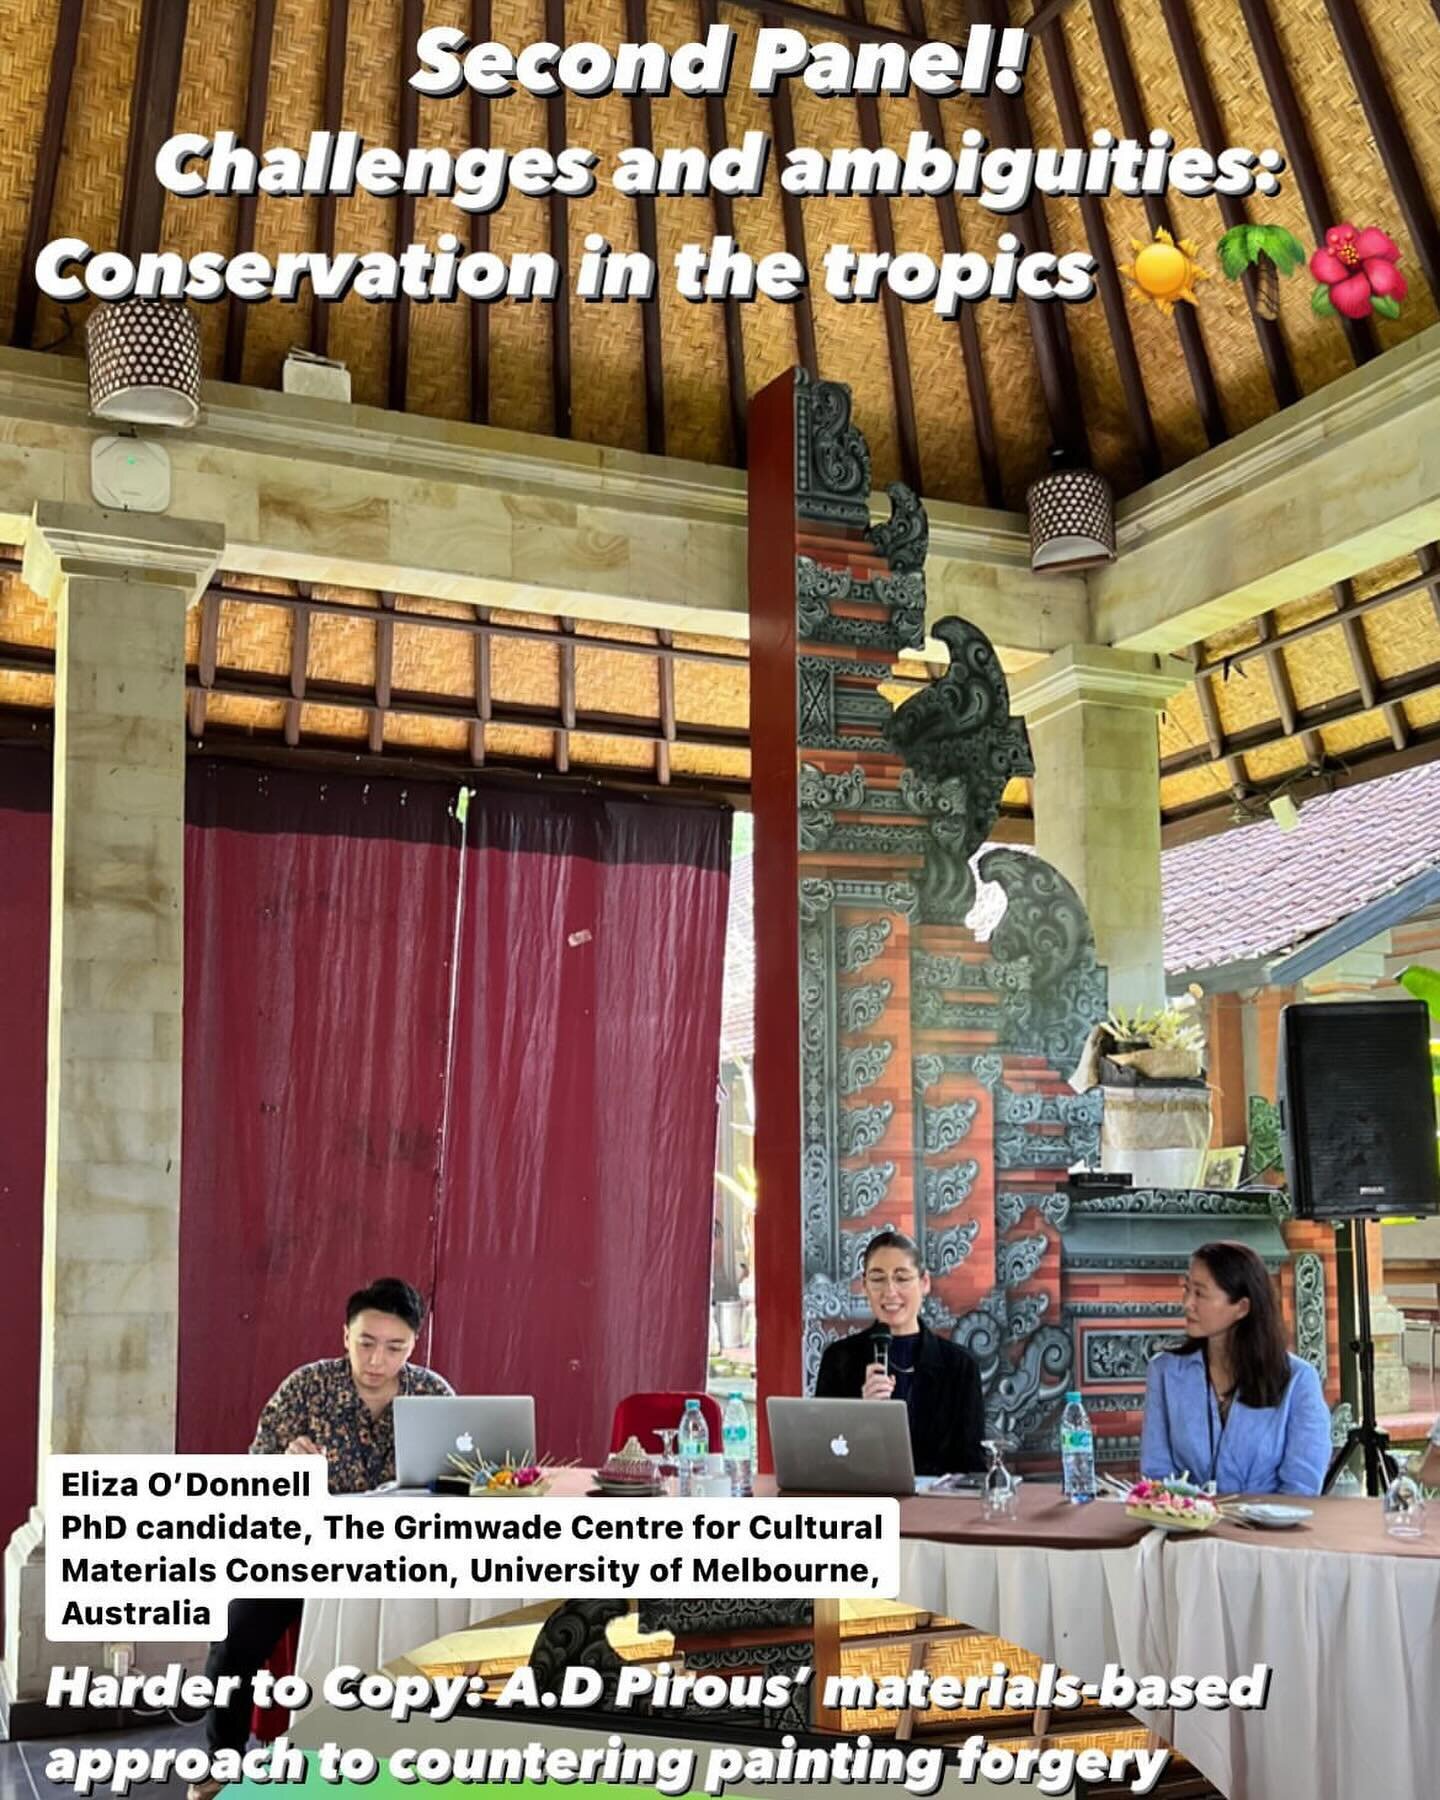 Panel 2 speakers addressed the theme &lsquo;Challenges and ambiguities: Conservation in the tropics&rsquo;. Presenters on this panel included Eliza O&rsquo;Donnell, Sandra Yee, Yuting Huang and Michaela Anselmini. Visit the APTCCARN6 website for an o